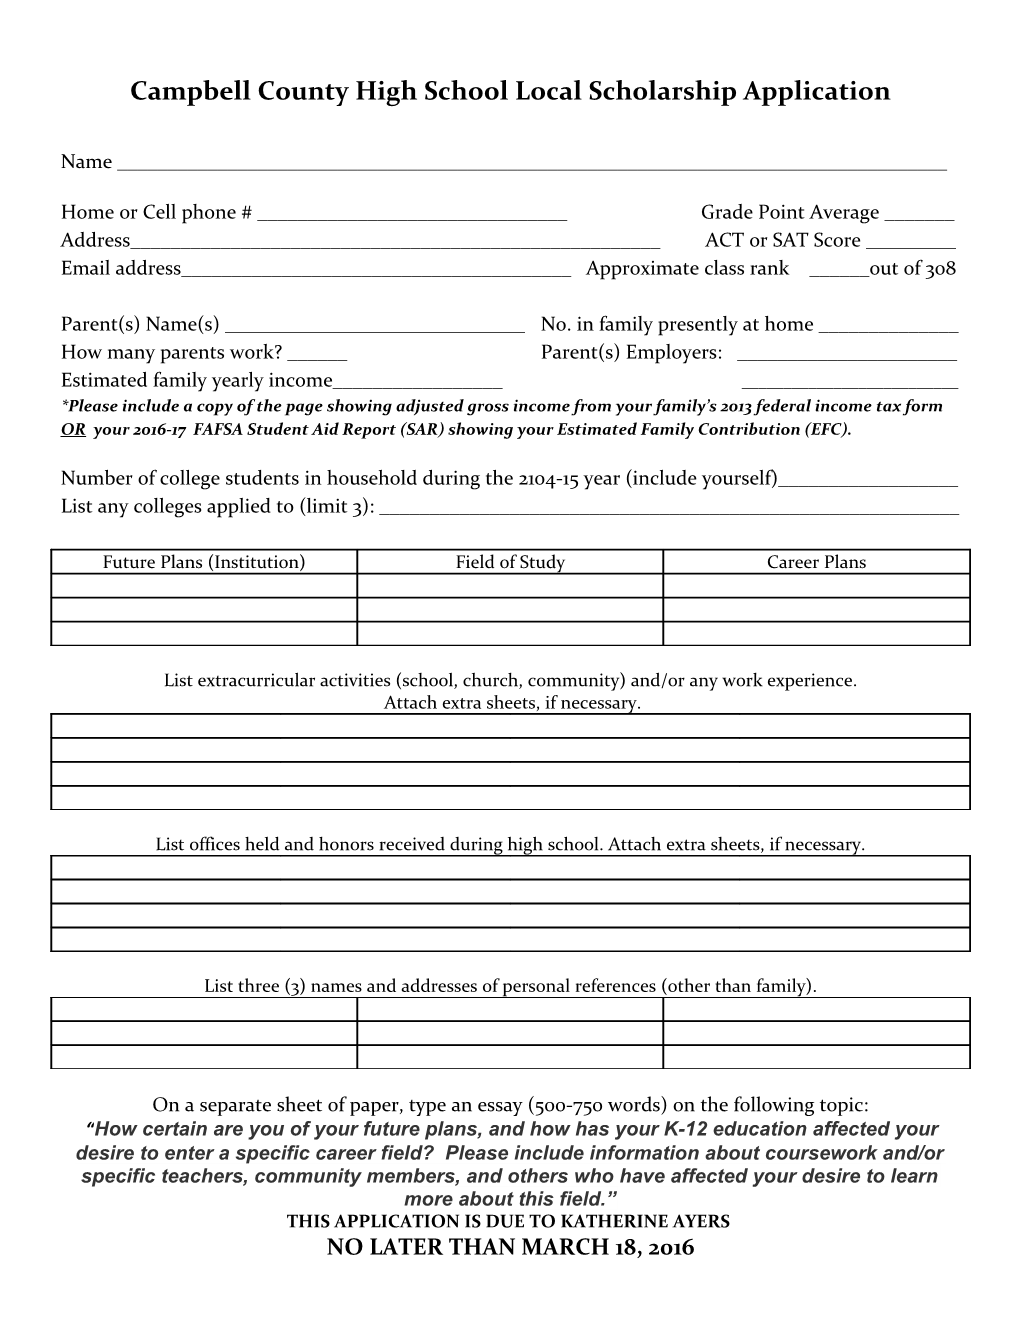 Campbell County High School Local Scholarship Application